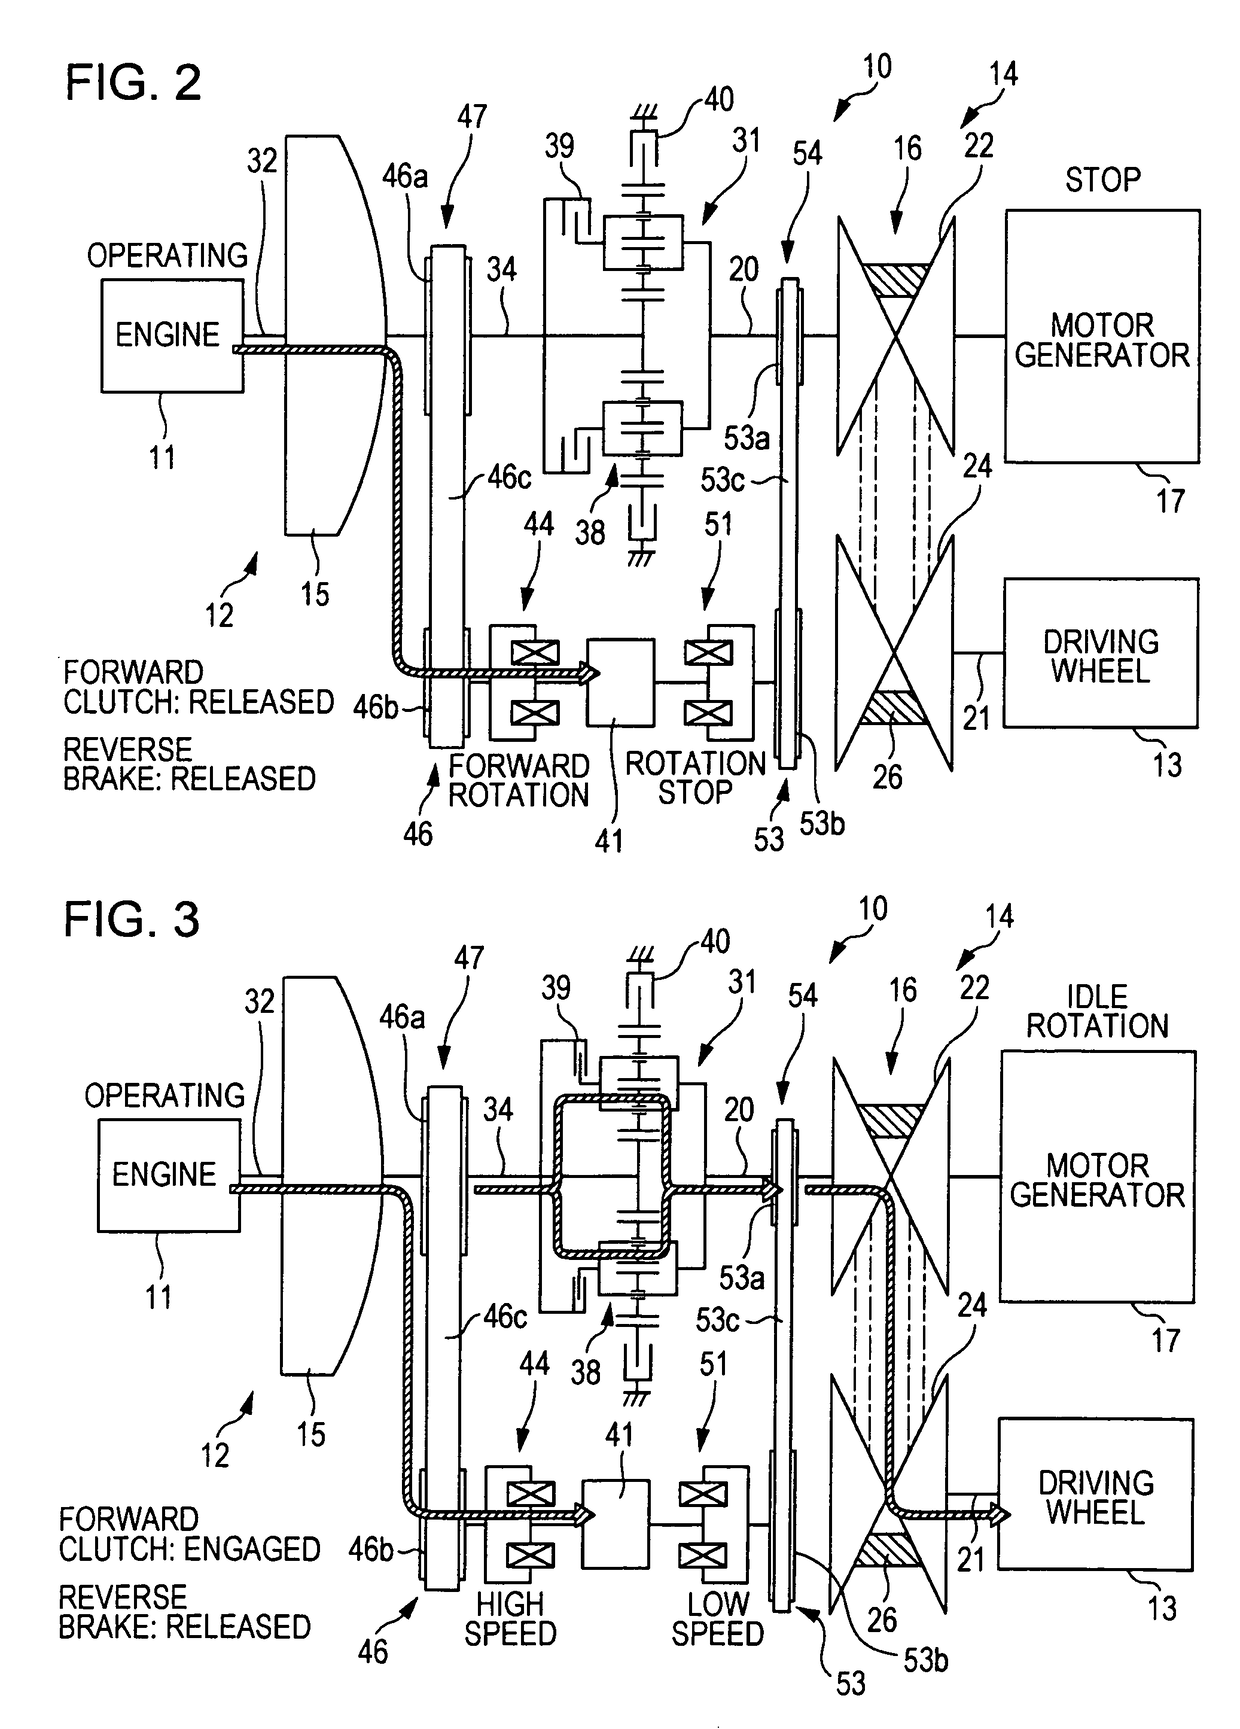 Drive apparatus for a vehicle